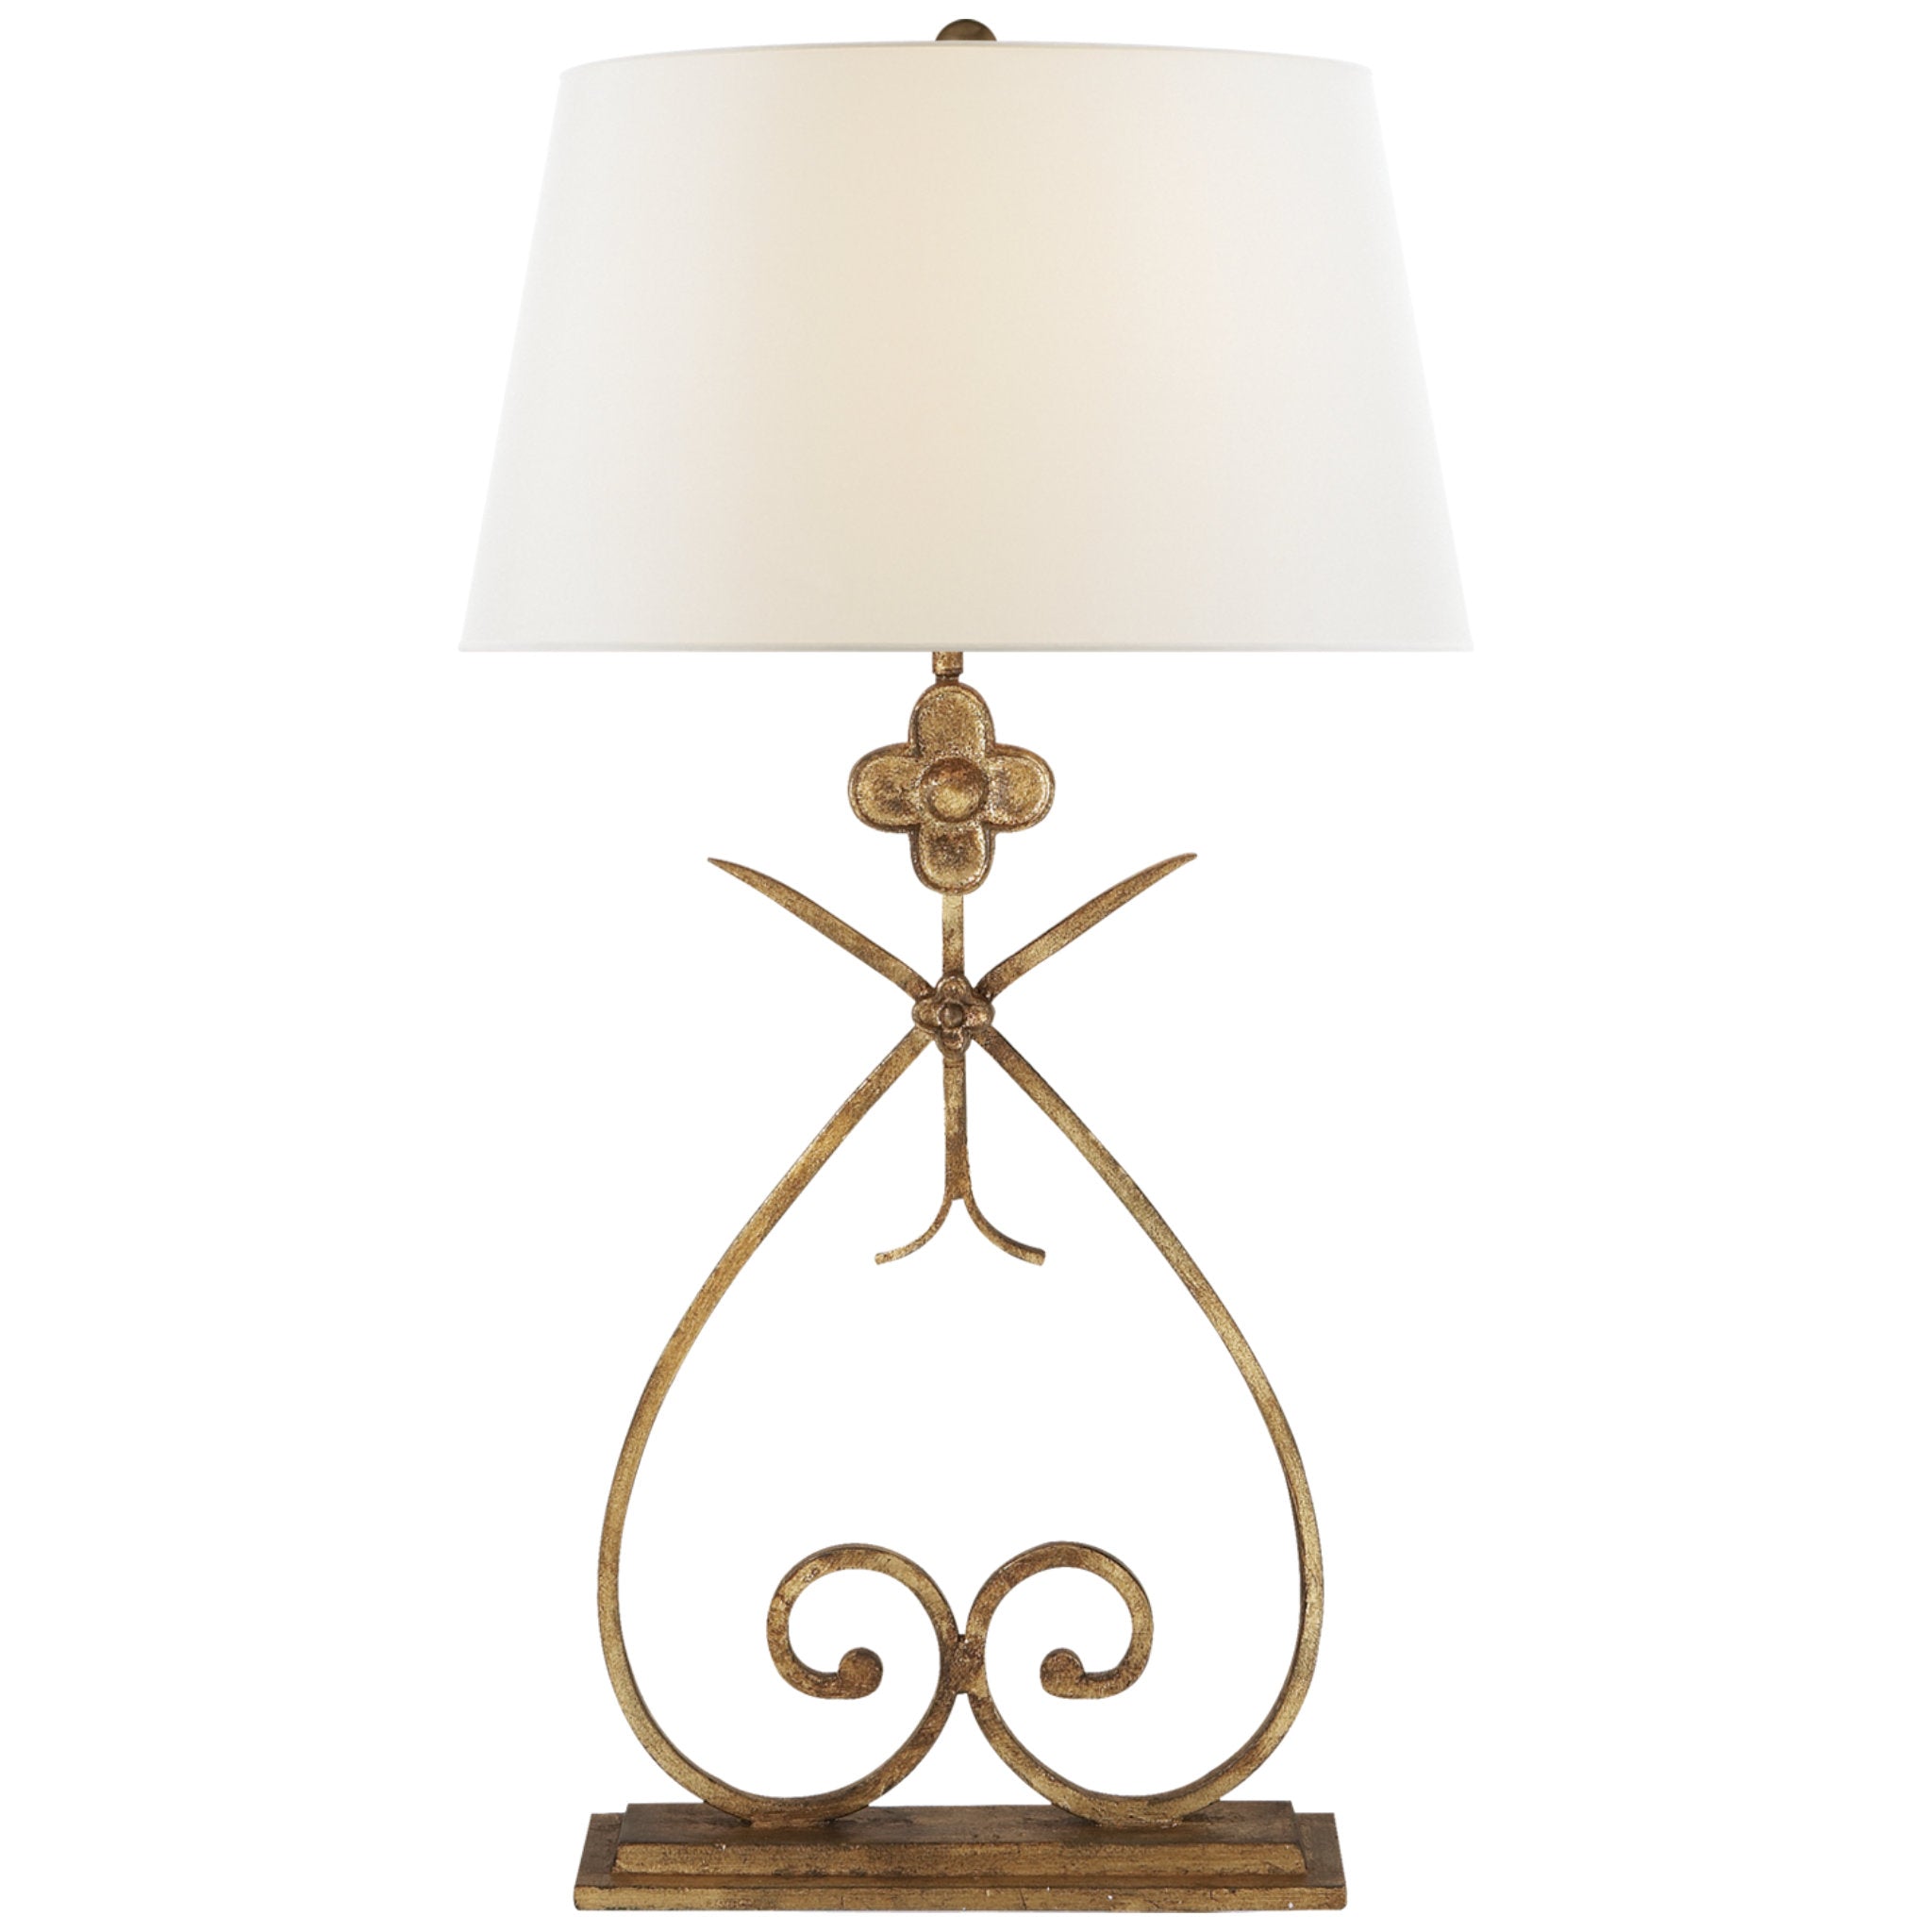 Suzanne Kasler Harper Table Lamp in Gilded Iron with Linen Shade